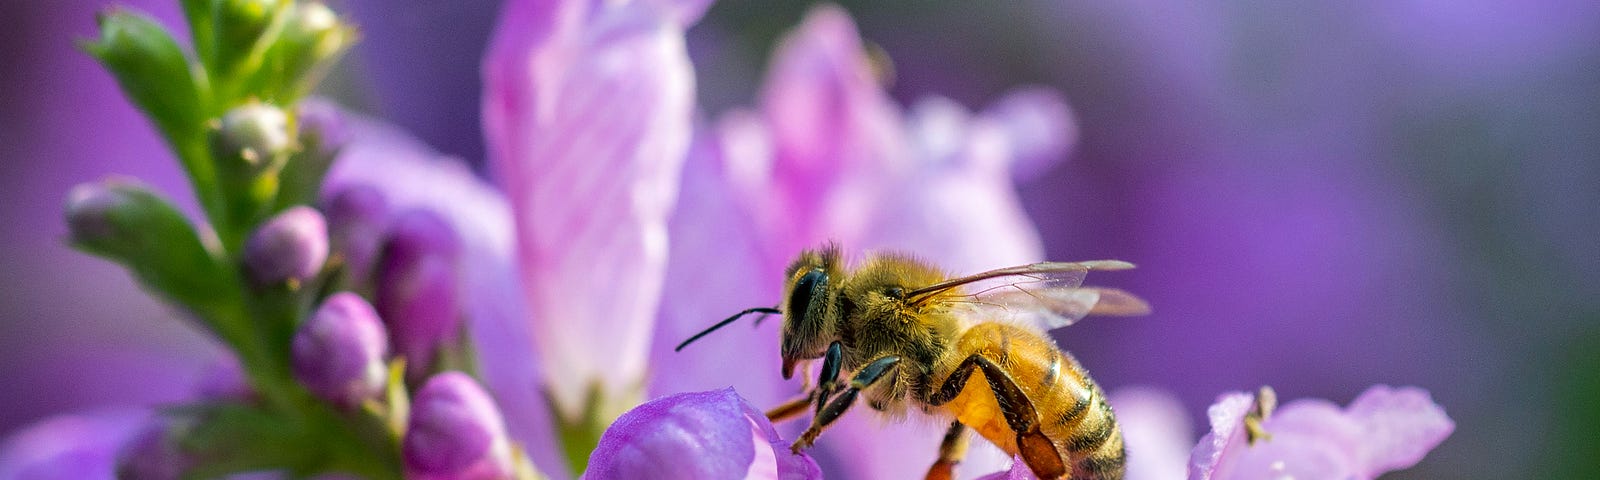 A bee gathers nectar and pollinates a flower